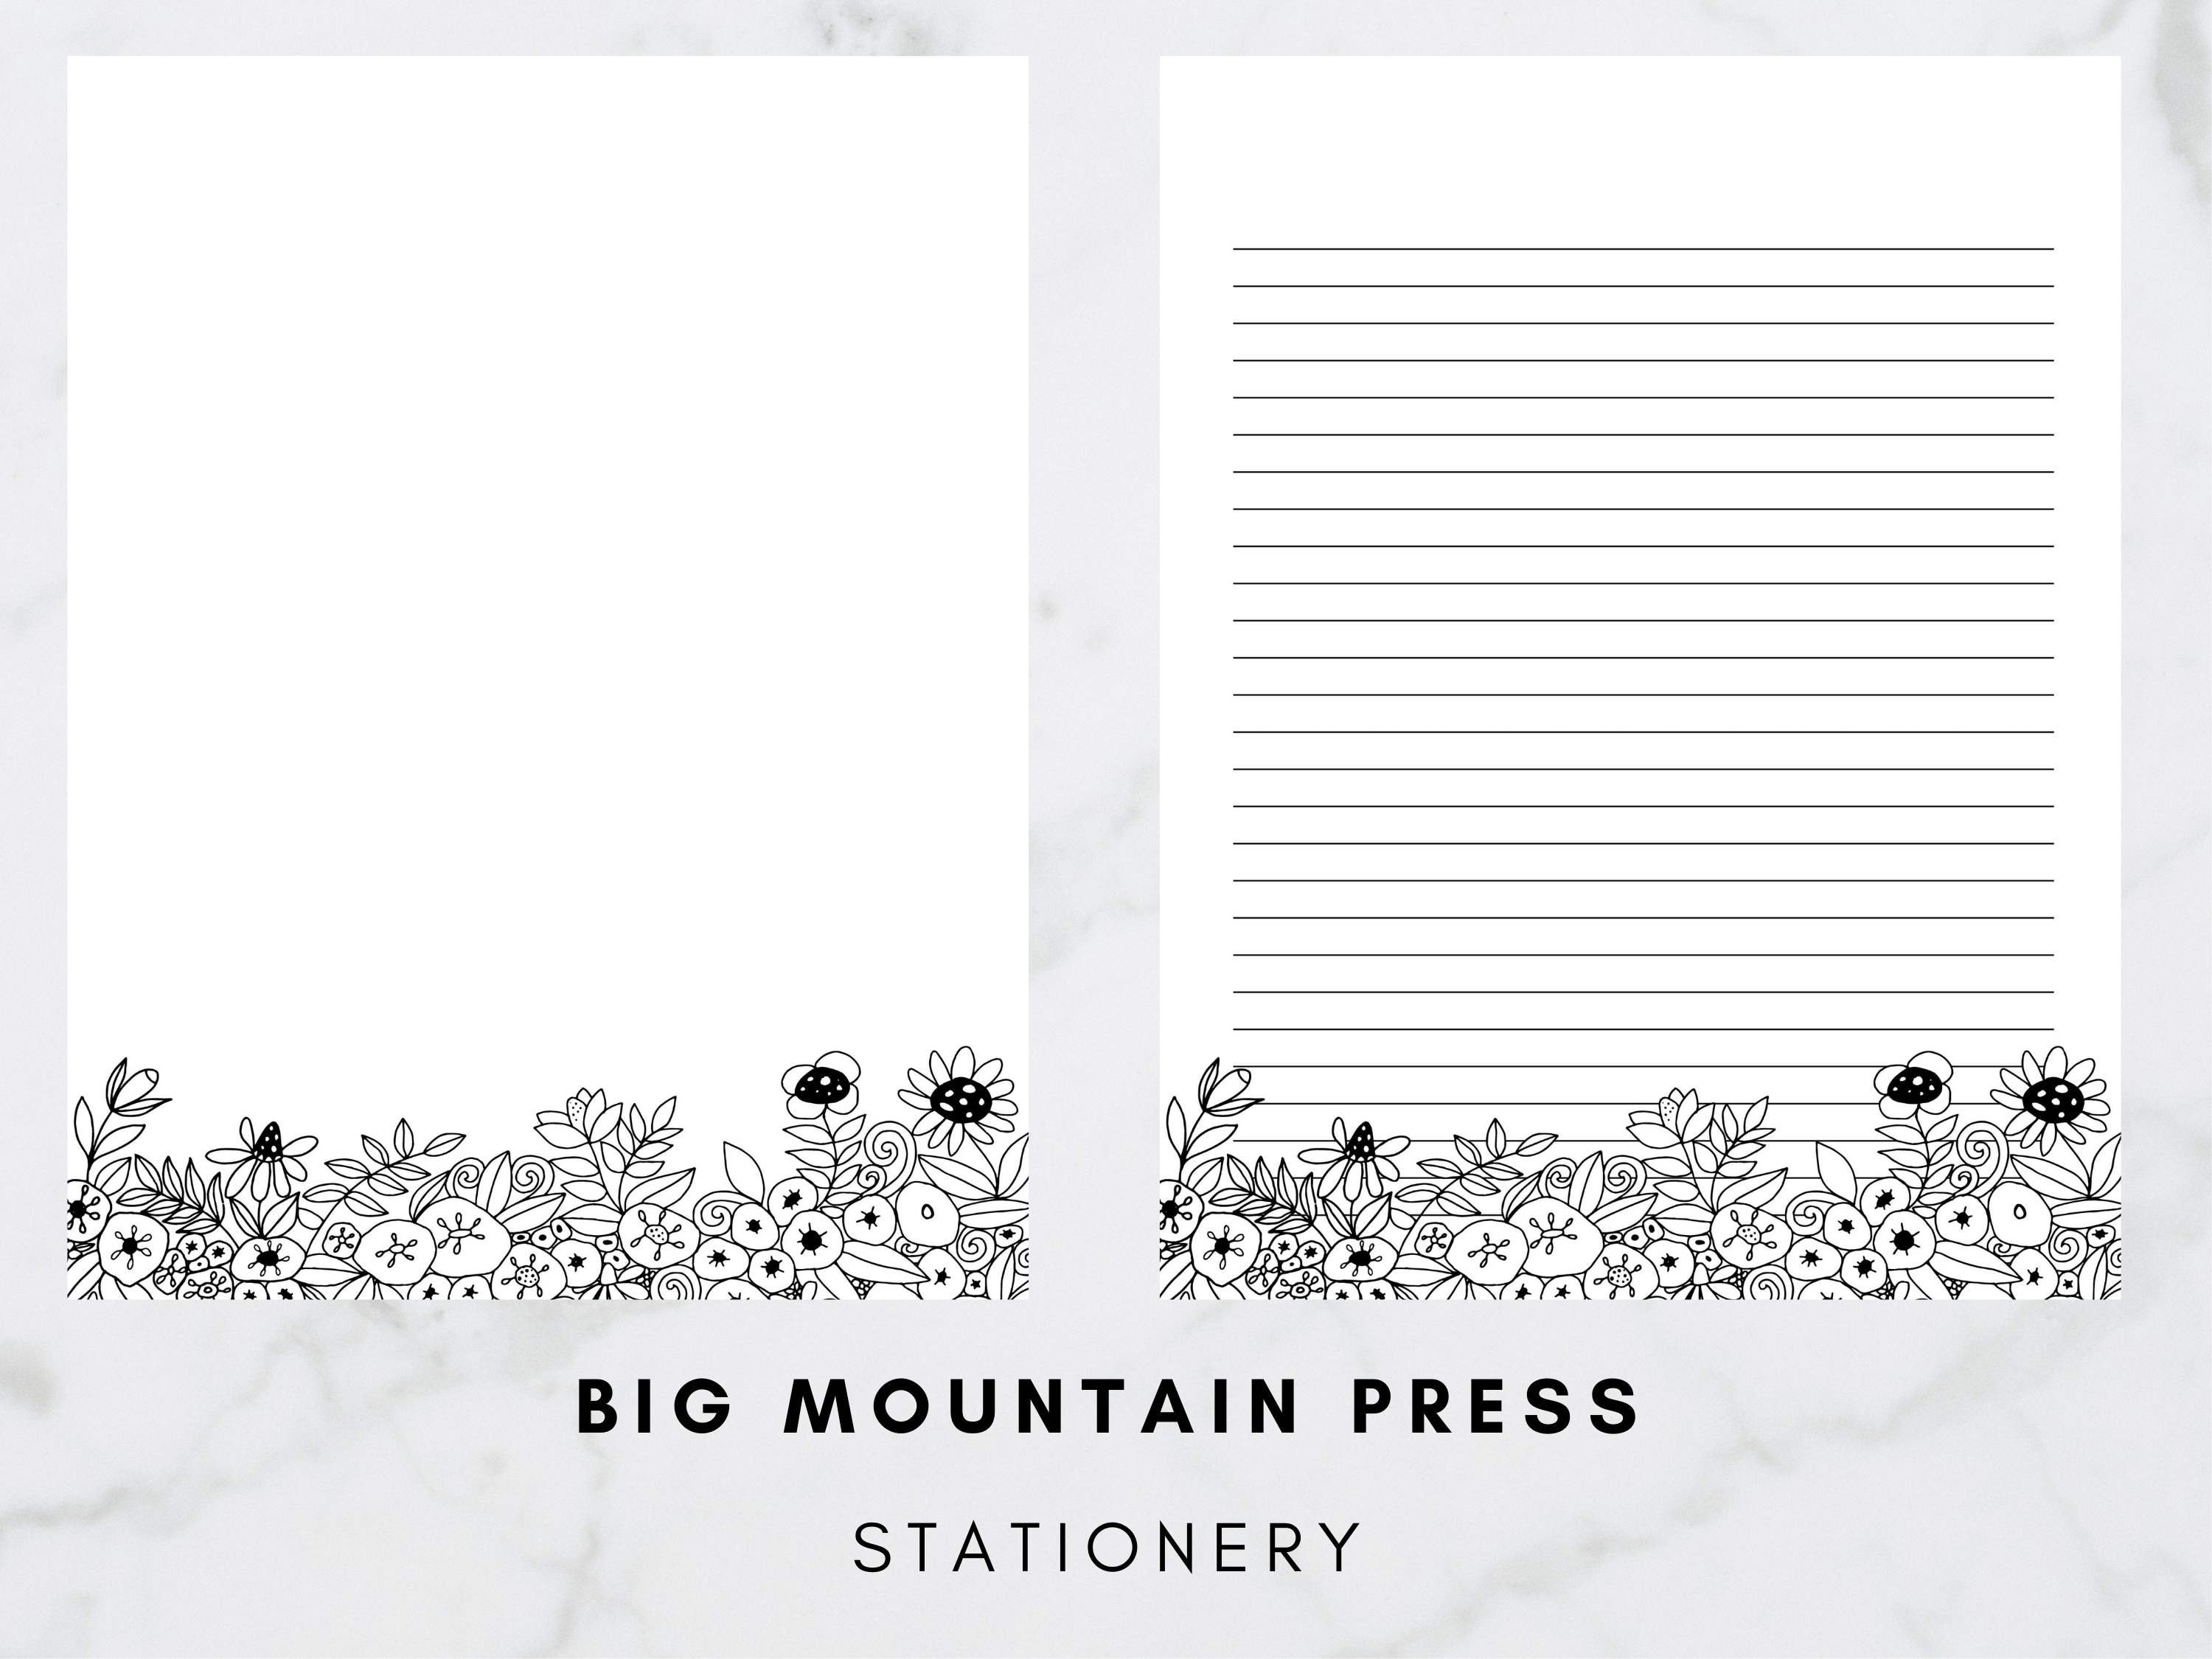 Black and White Floral Lined Paper, Printable Stationery Paper, Digital  Paper, Journal Paper, Note Paper, Digital Download Stationery Paper 